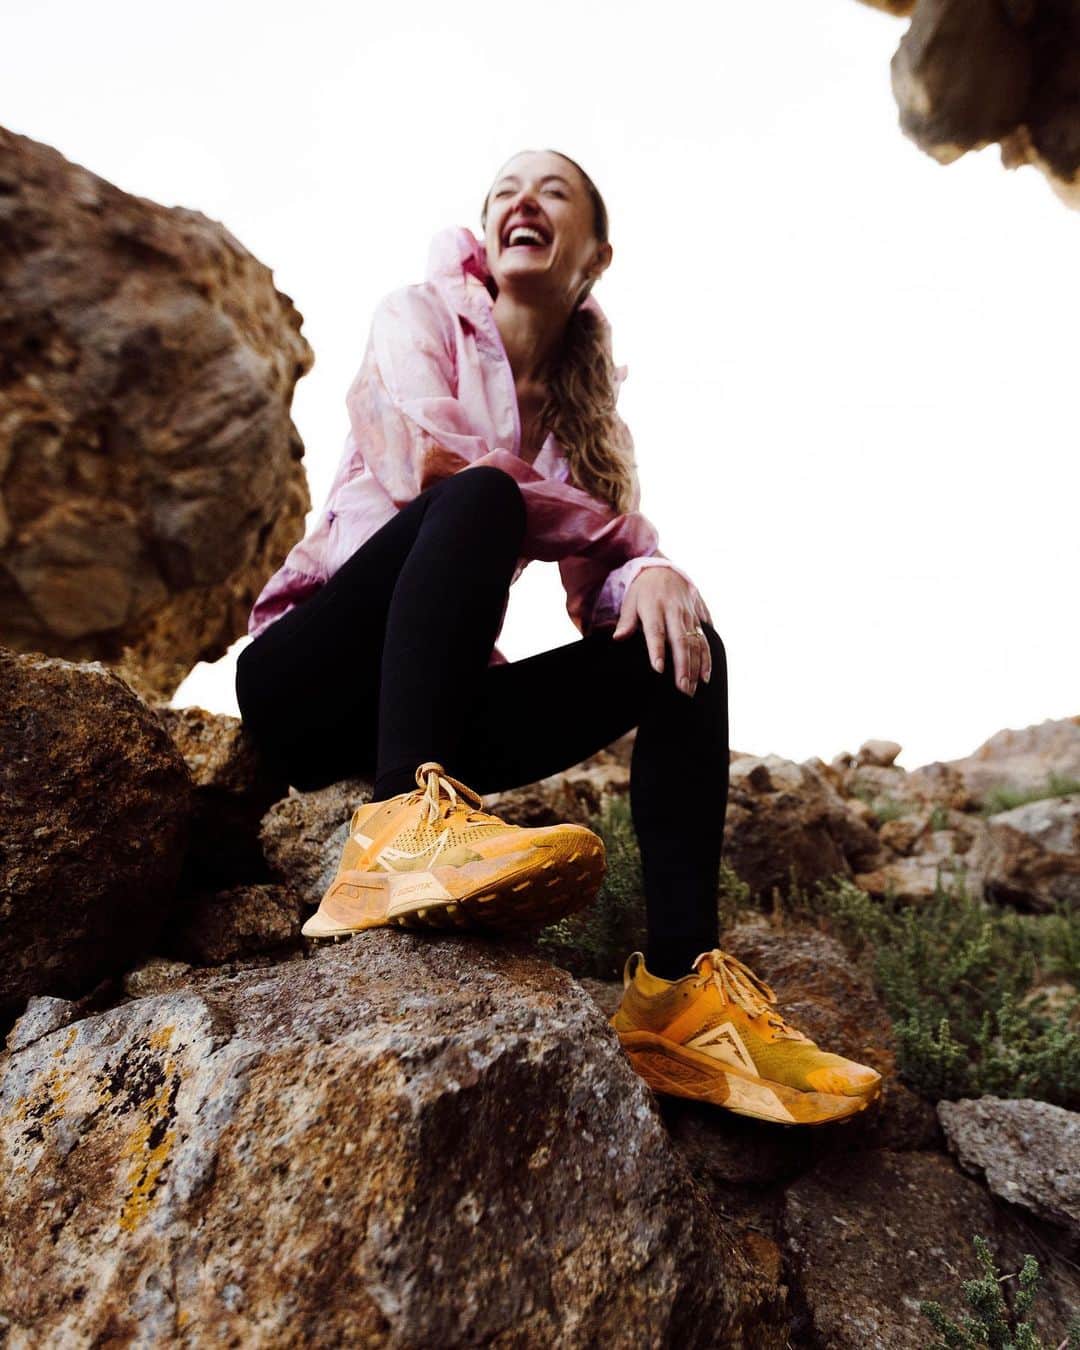 The Run Dept.のインスタグラム：「Women of the Wasatch is a Utah-based women's trail running group working to get more women into trail running. @campjewel is the Director of Operations and has helped grow the group to 700+ members.   “As a long distance runner, it's important to me to have a shoe that I'm comfortable and confident in to help reduce injury. My current favorite is the Nike Zegama—it is the perfect blend of comfort and grip for varied terrain.”  Have you tried the Zegama? 👀   📸: @mlauchert」